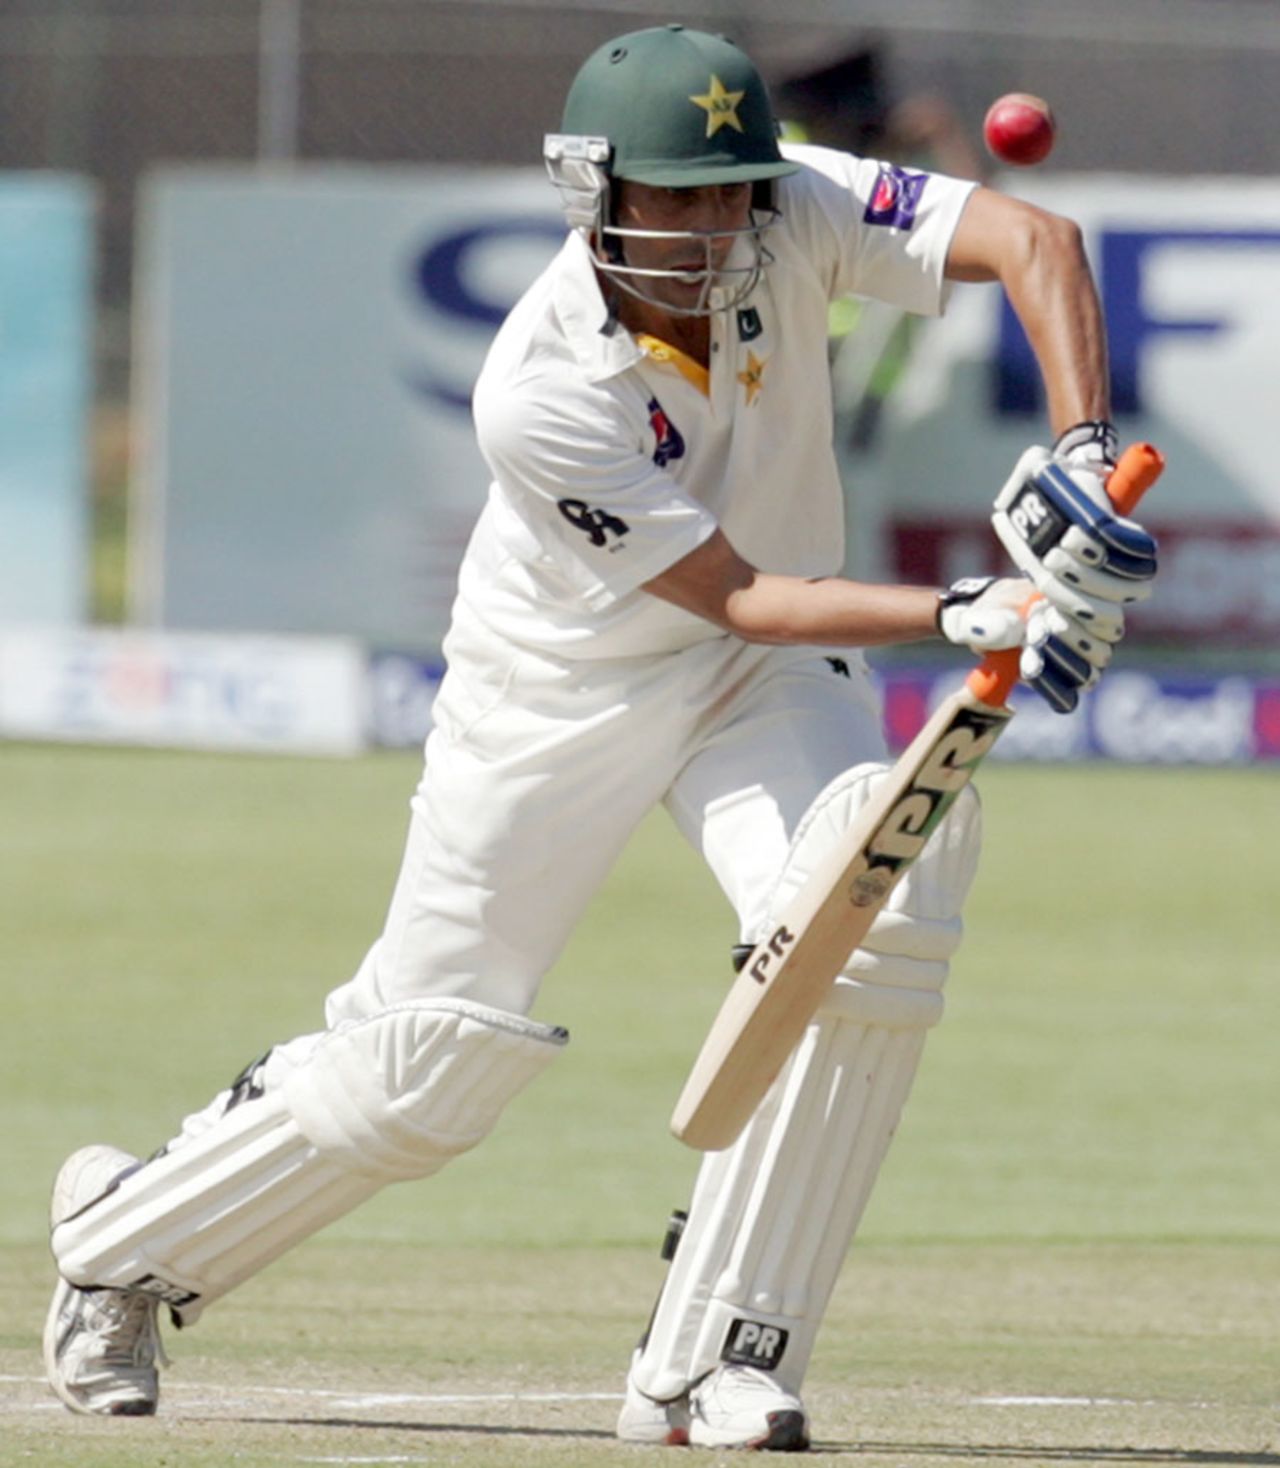 Younis Khan stoic in defence, Zimbabwe v Pakistan, 1st Test, 3rd day, Harare, September 5, 2013